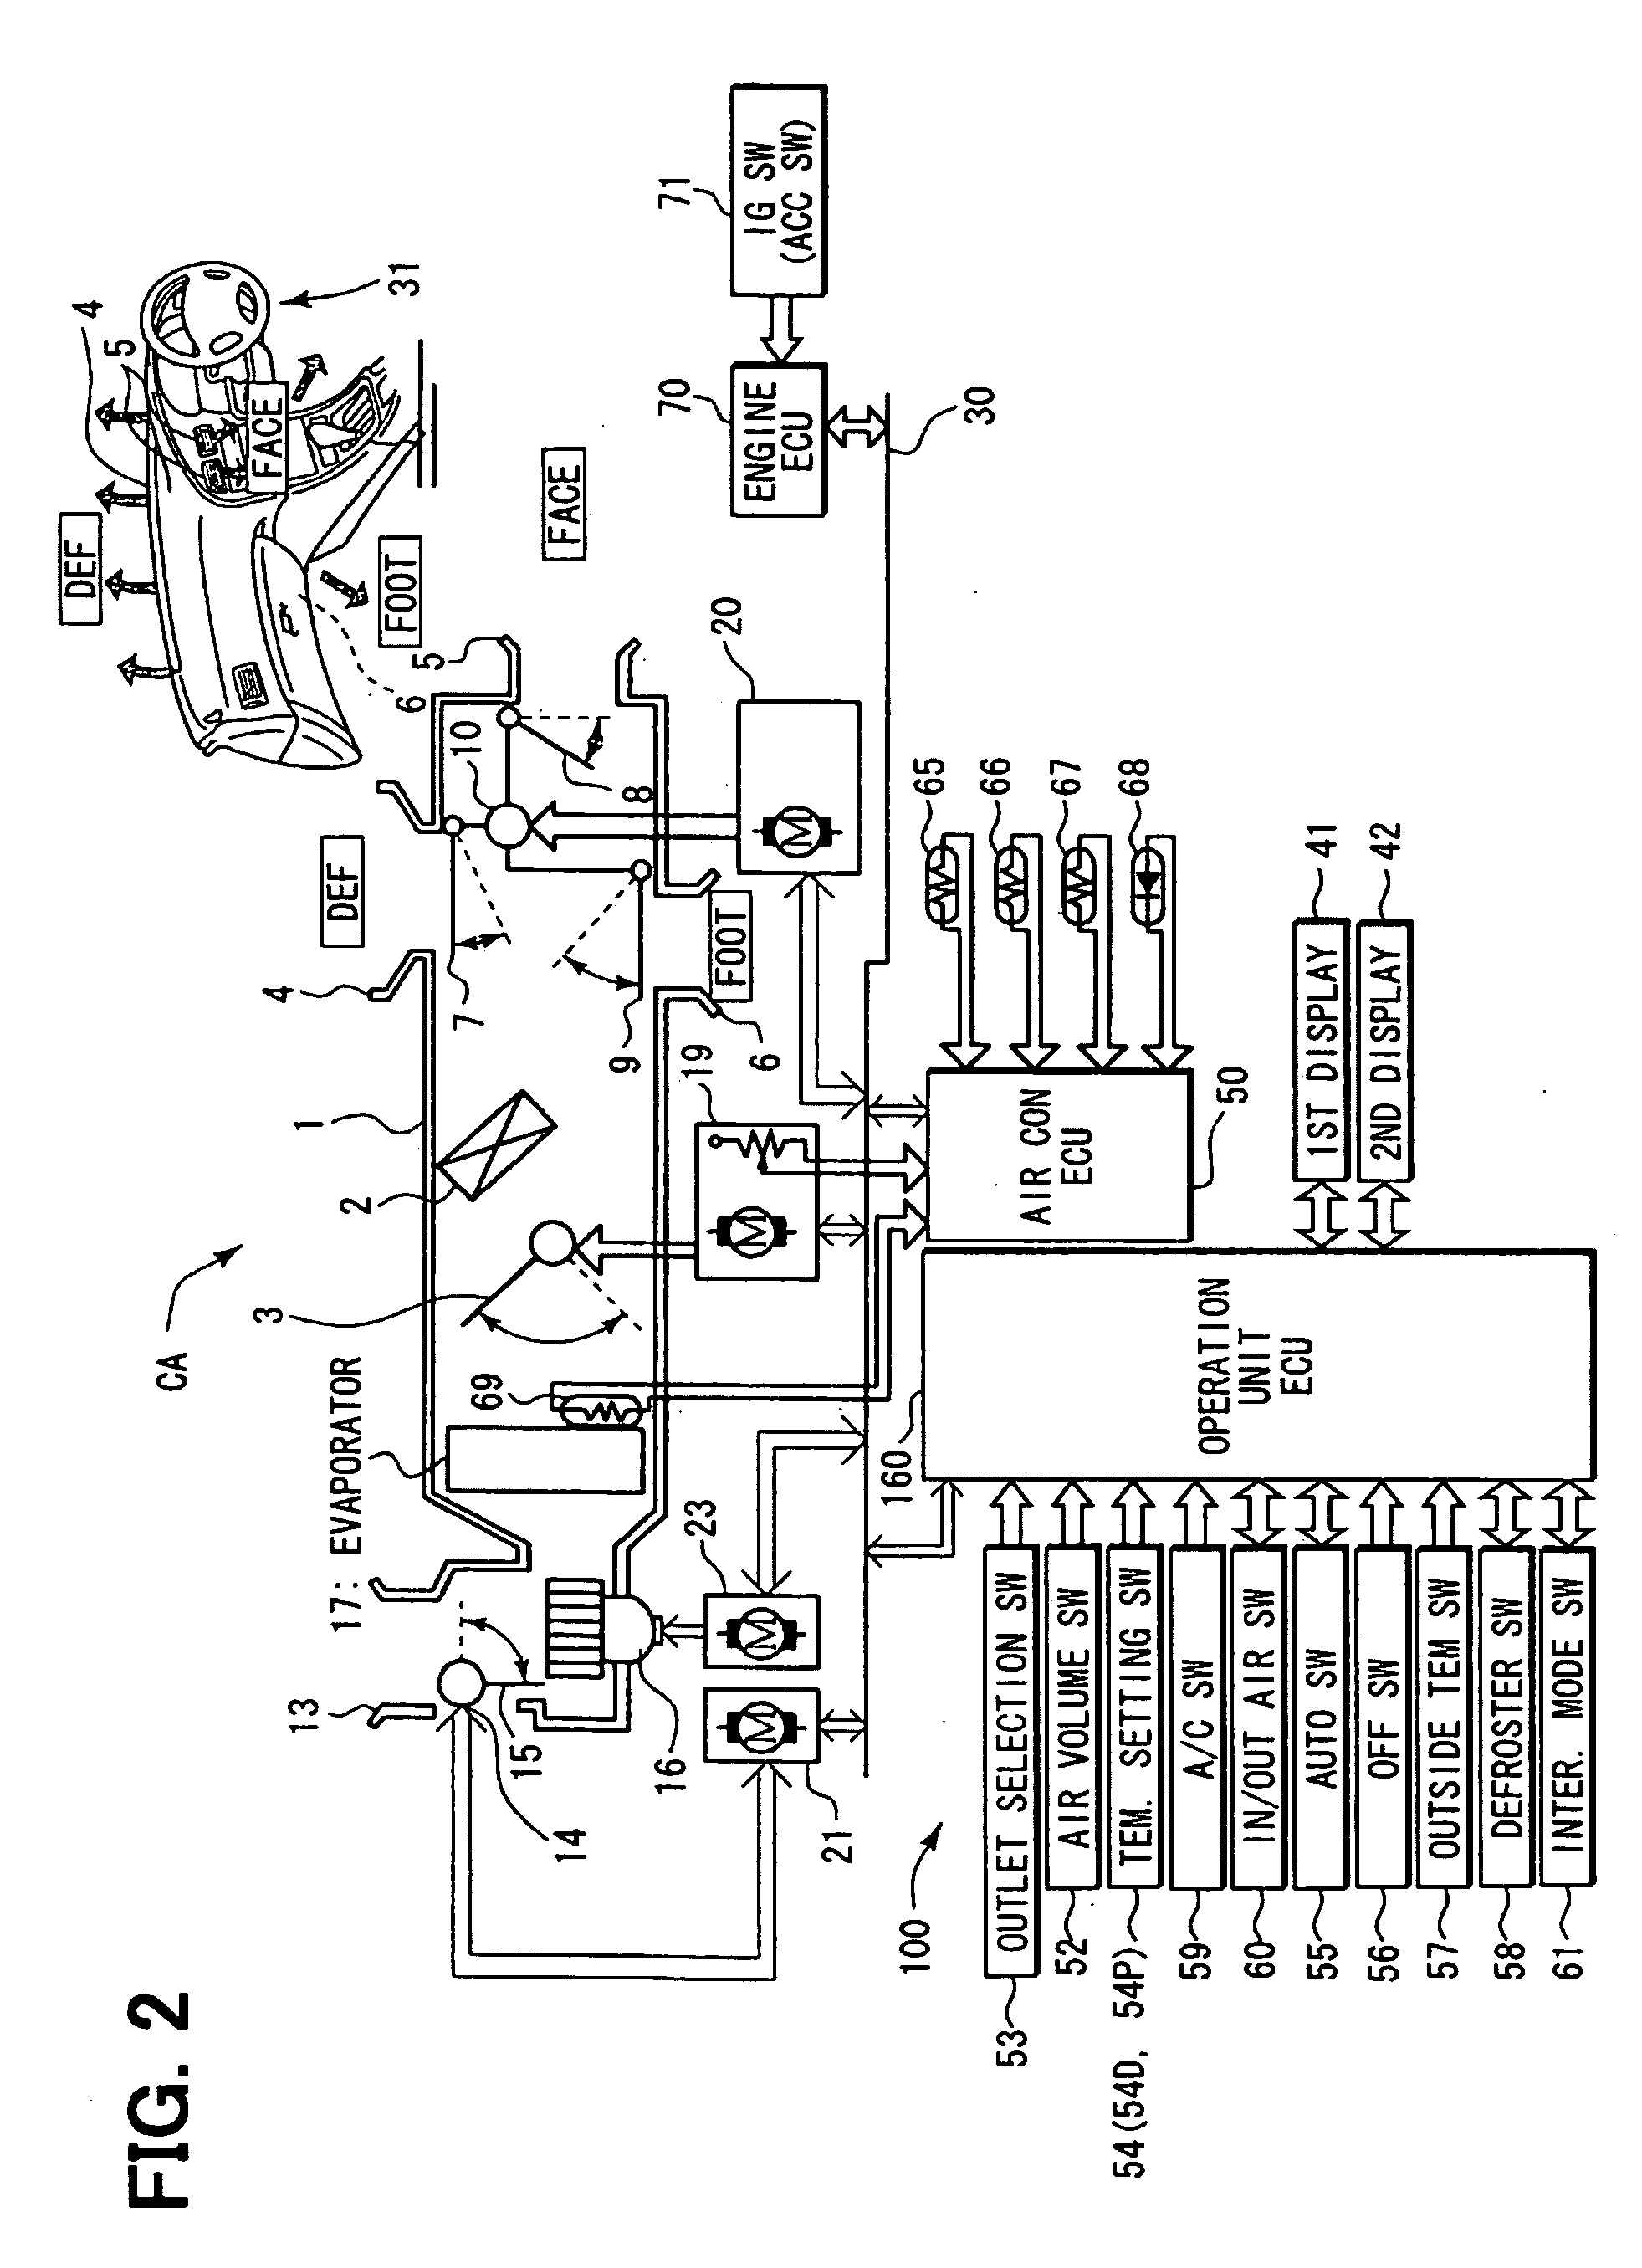 Onboard electronic device operating unit